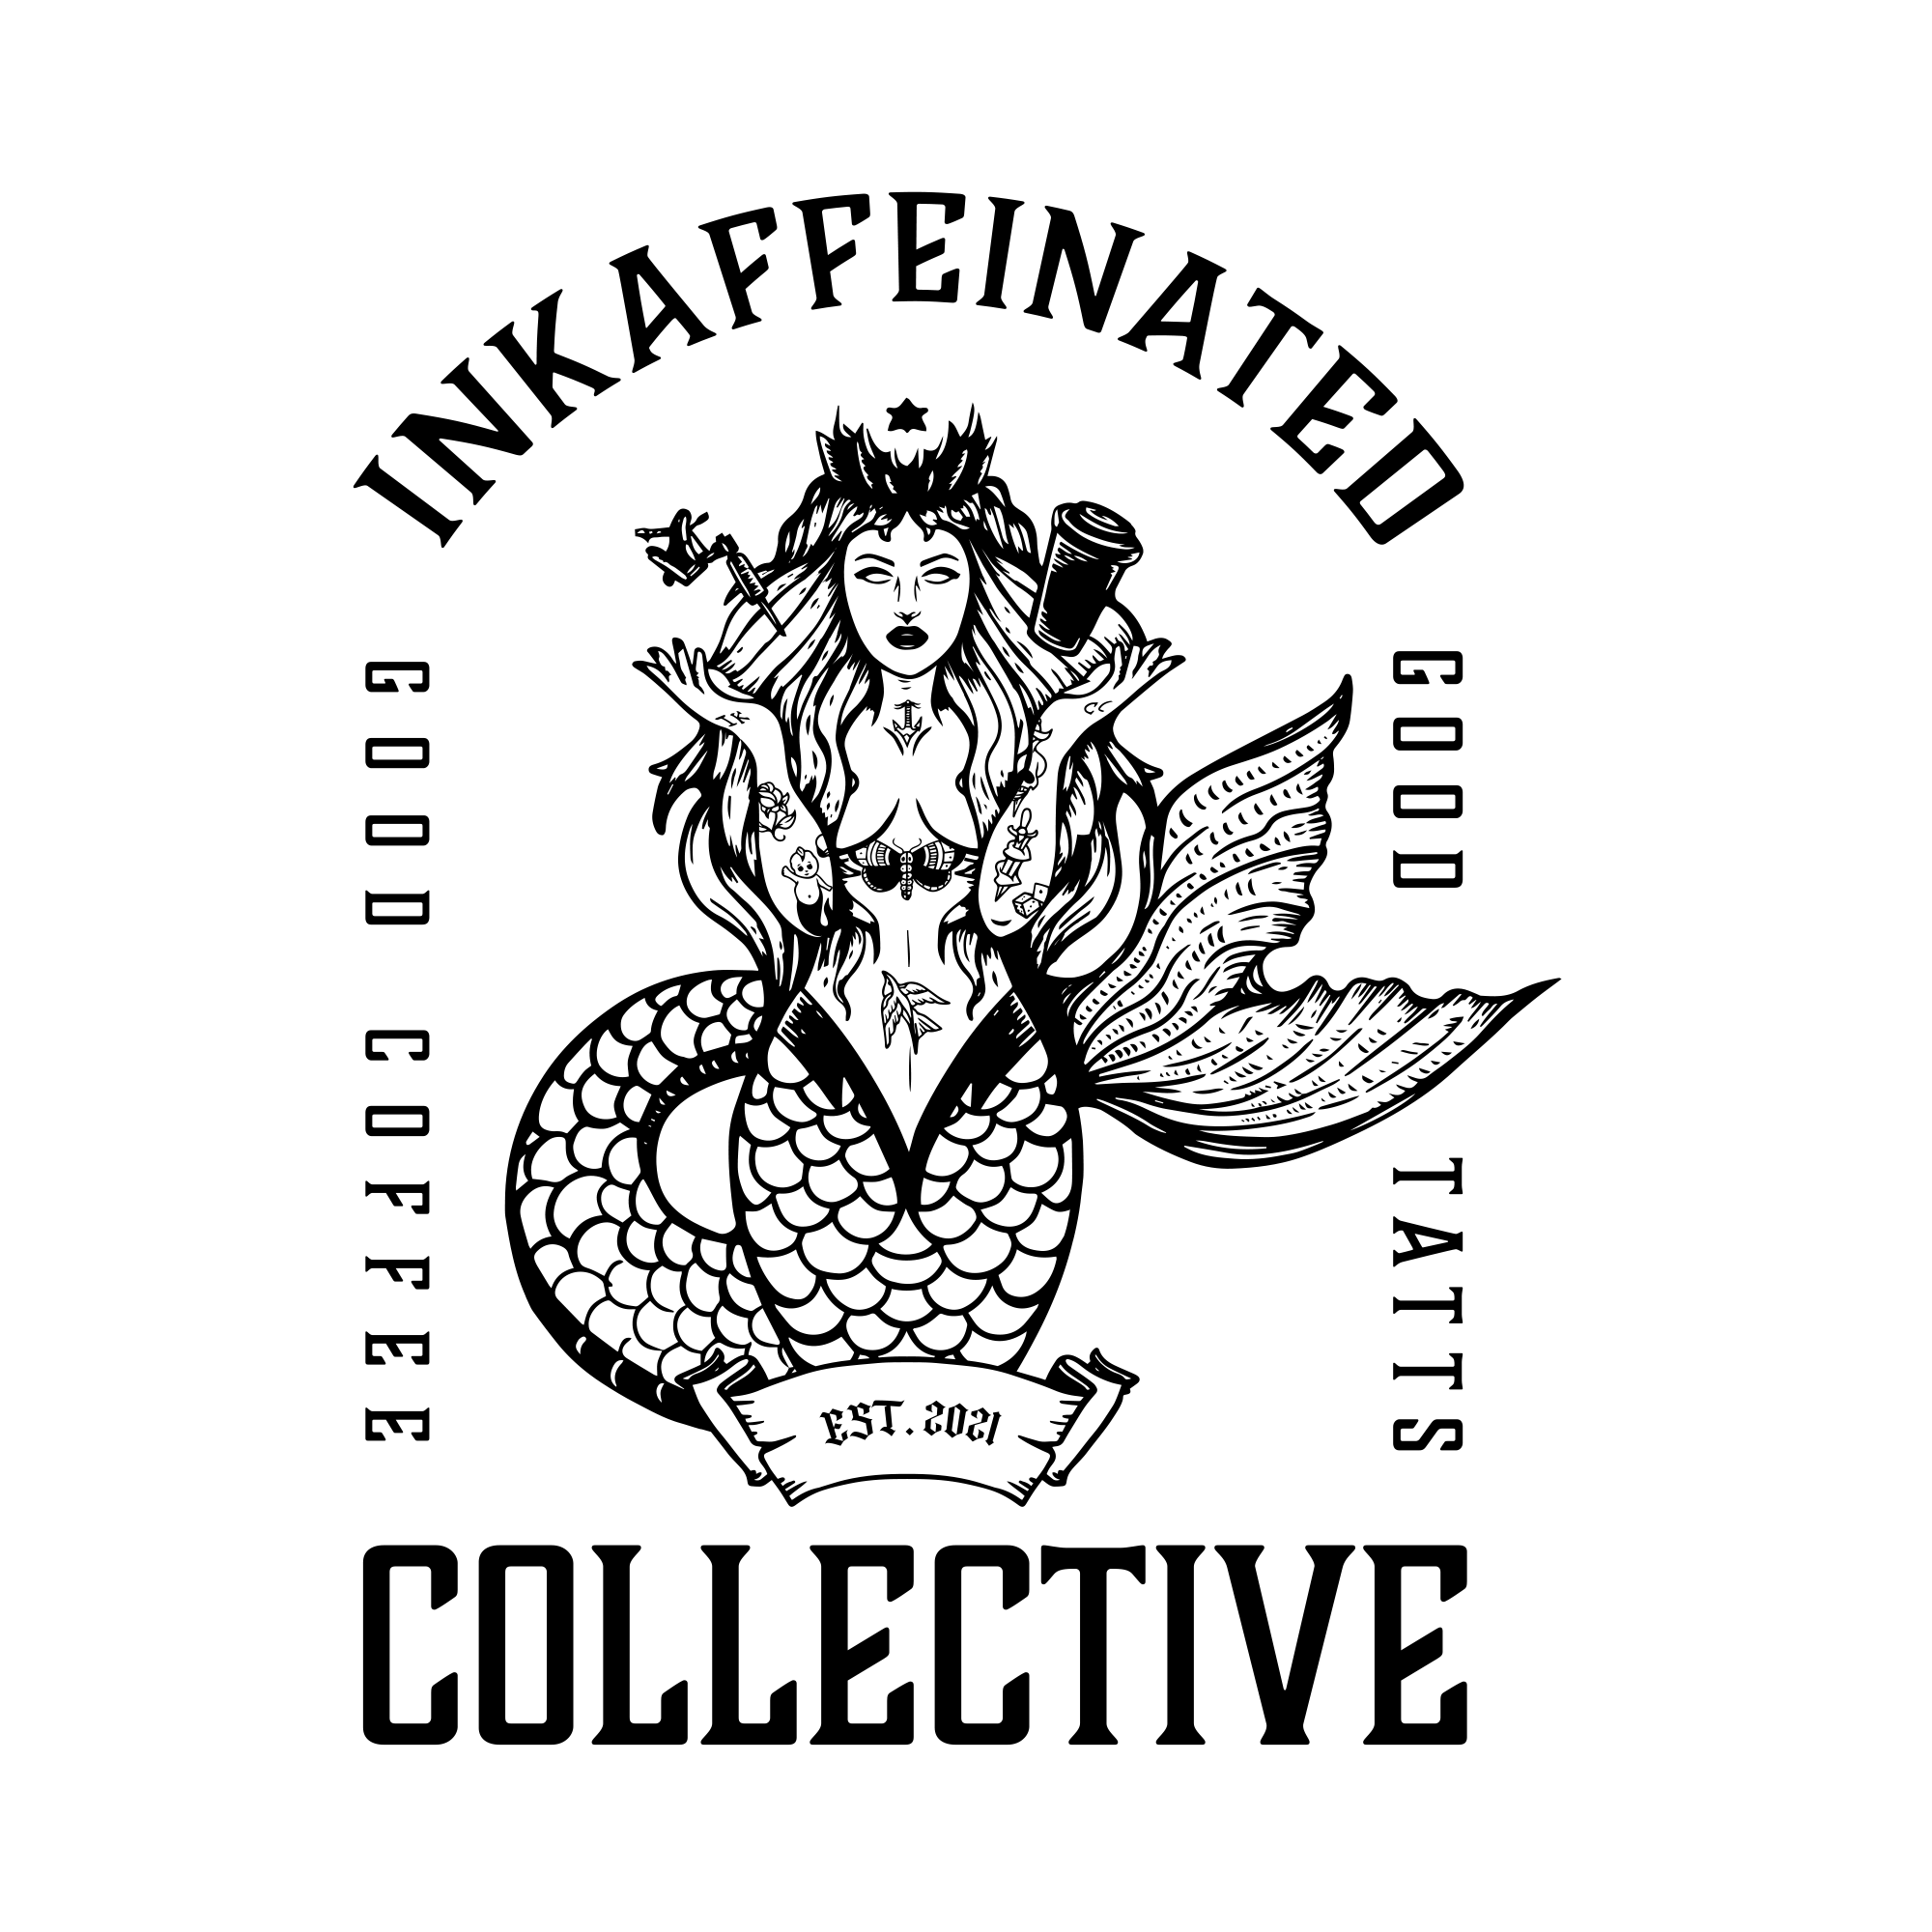 3”Inkaffeinated Collective Mermaid Sticker FREE WITH PURCHASE